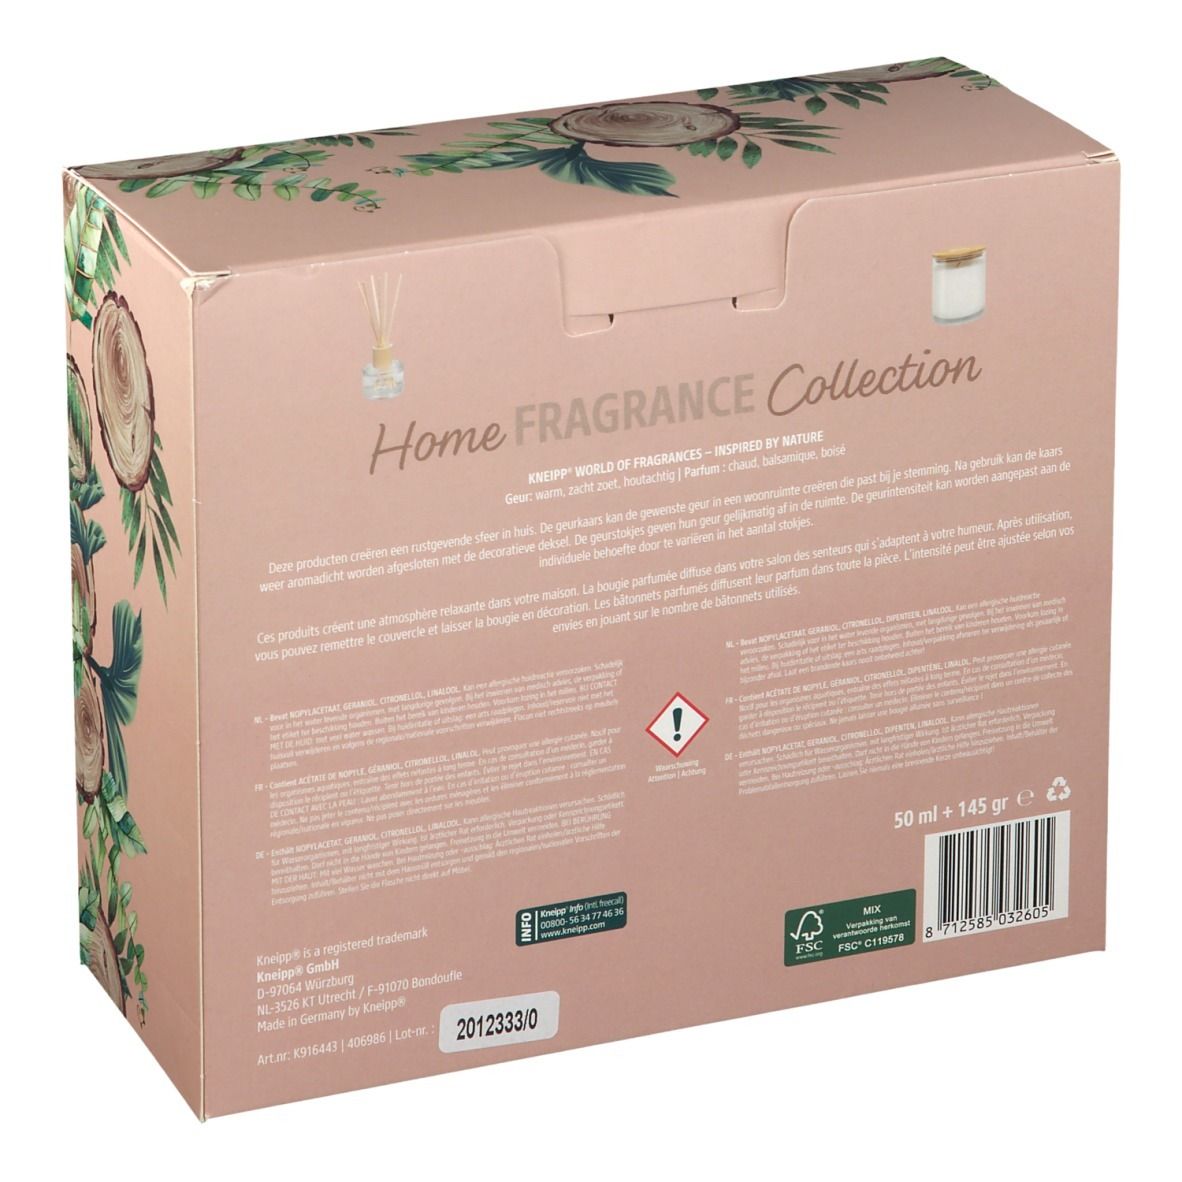 Kneipp Home Fragrance Luxe Gift Set